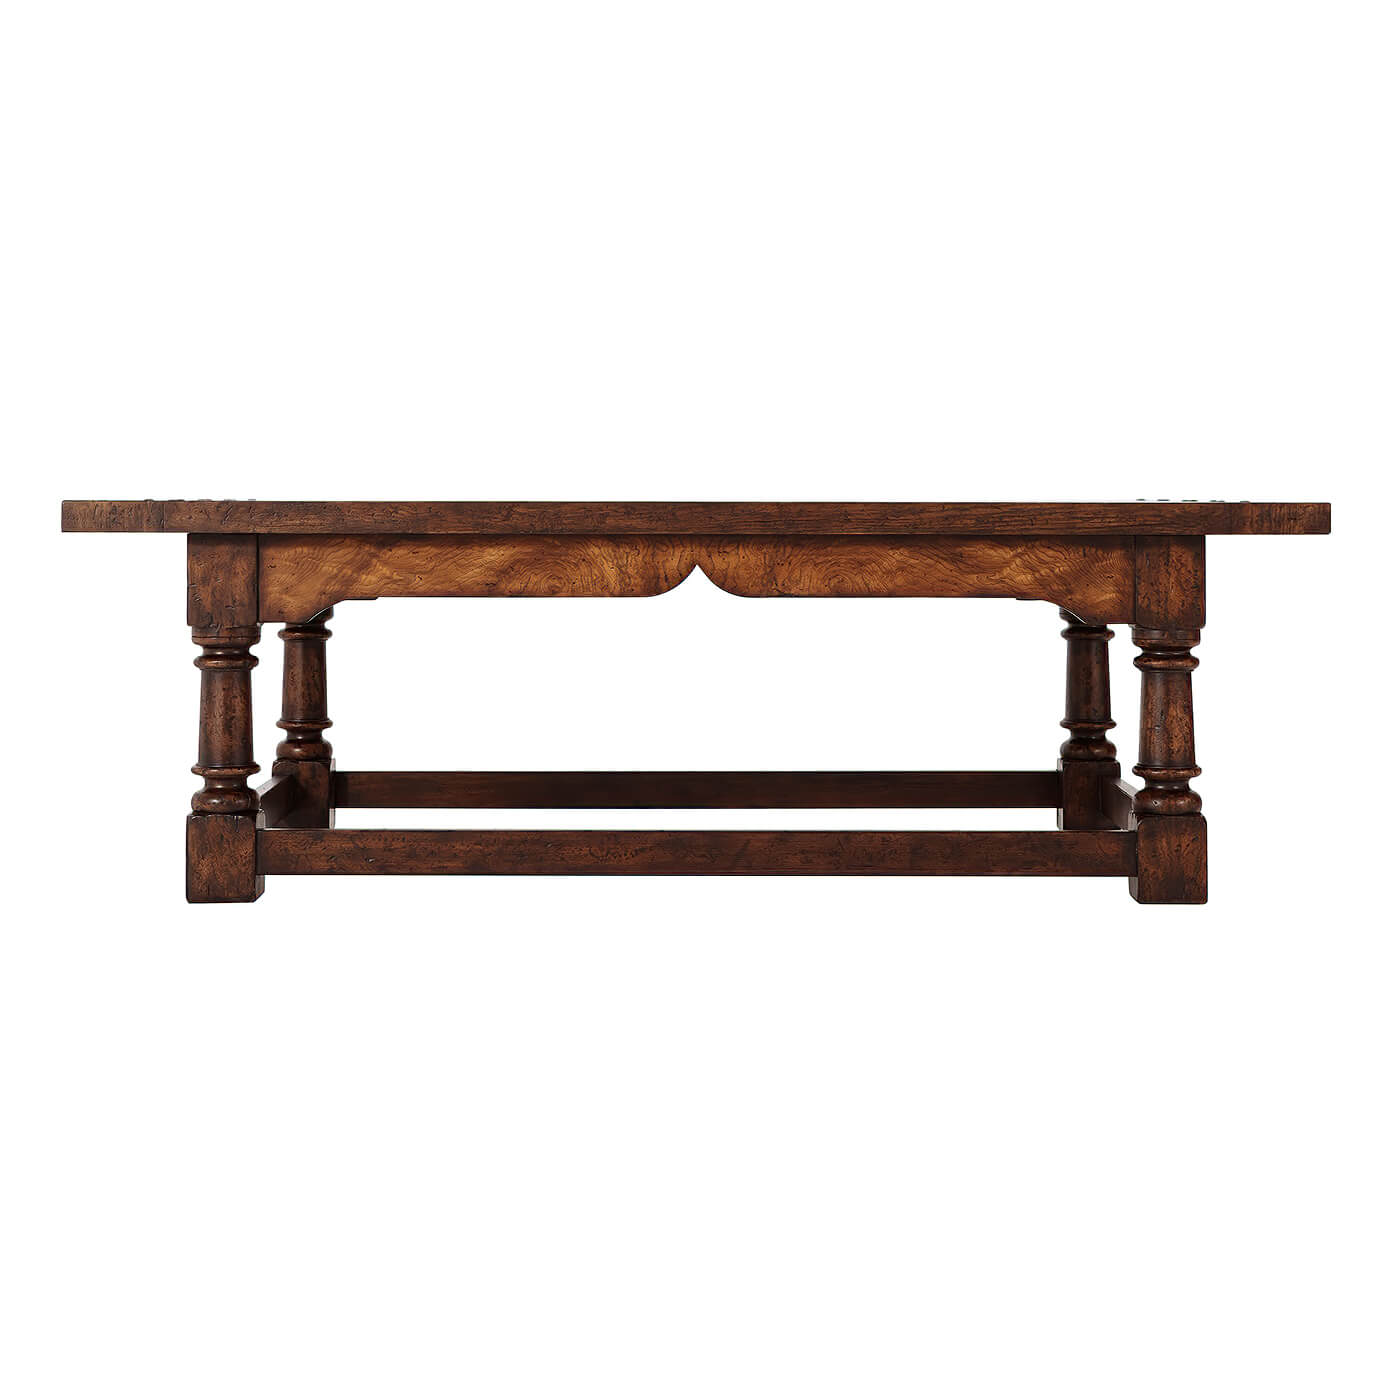 17th Century Refectory Form Cocktail Table - English Georgian America